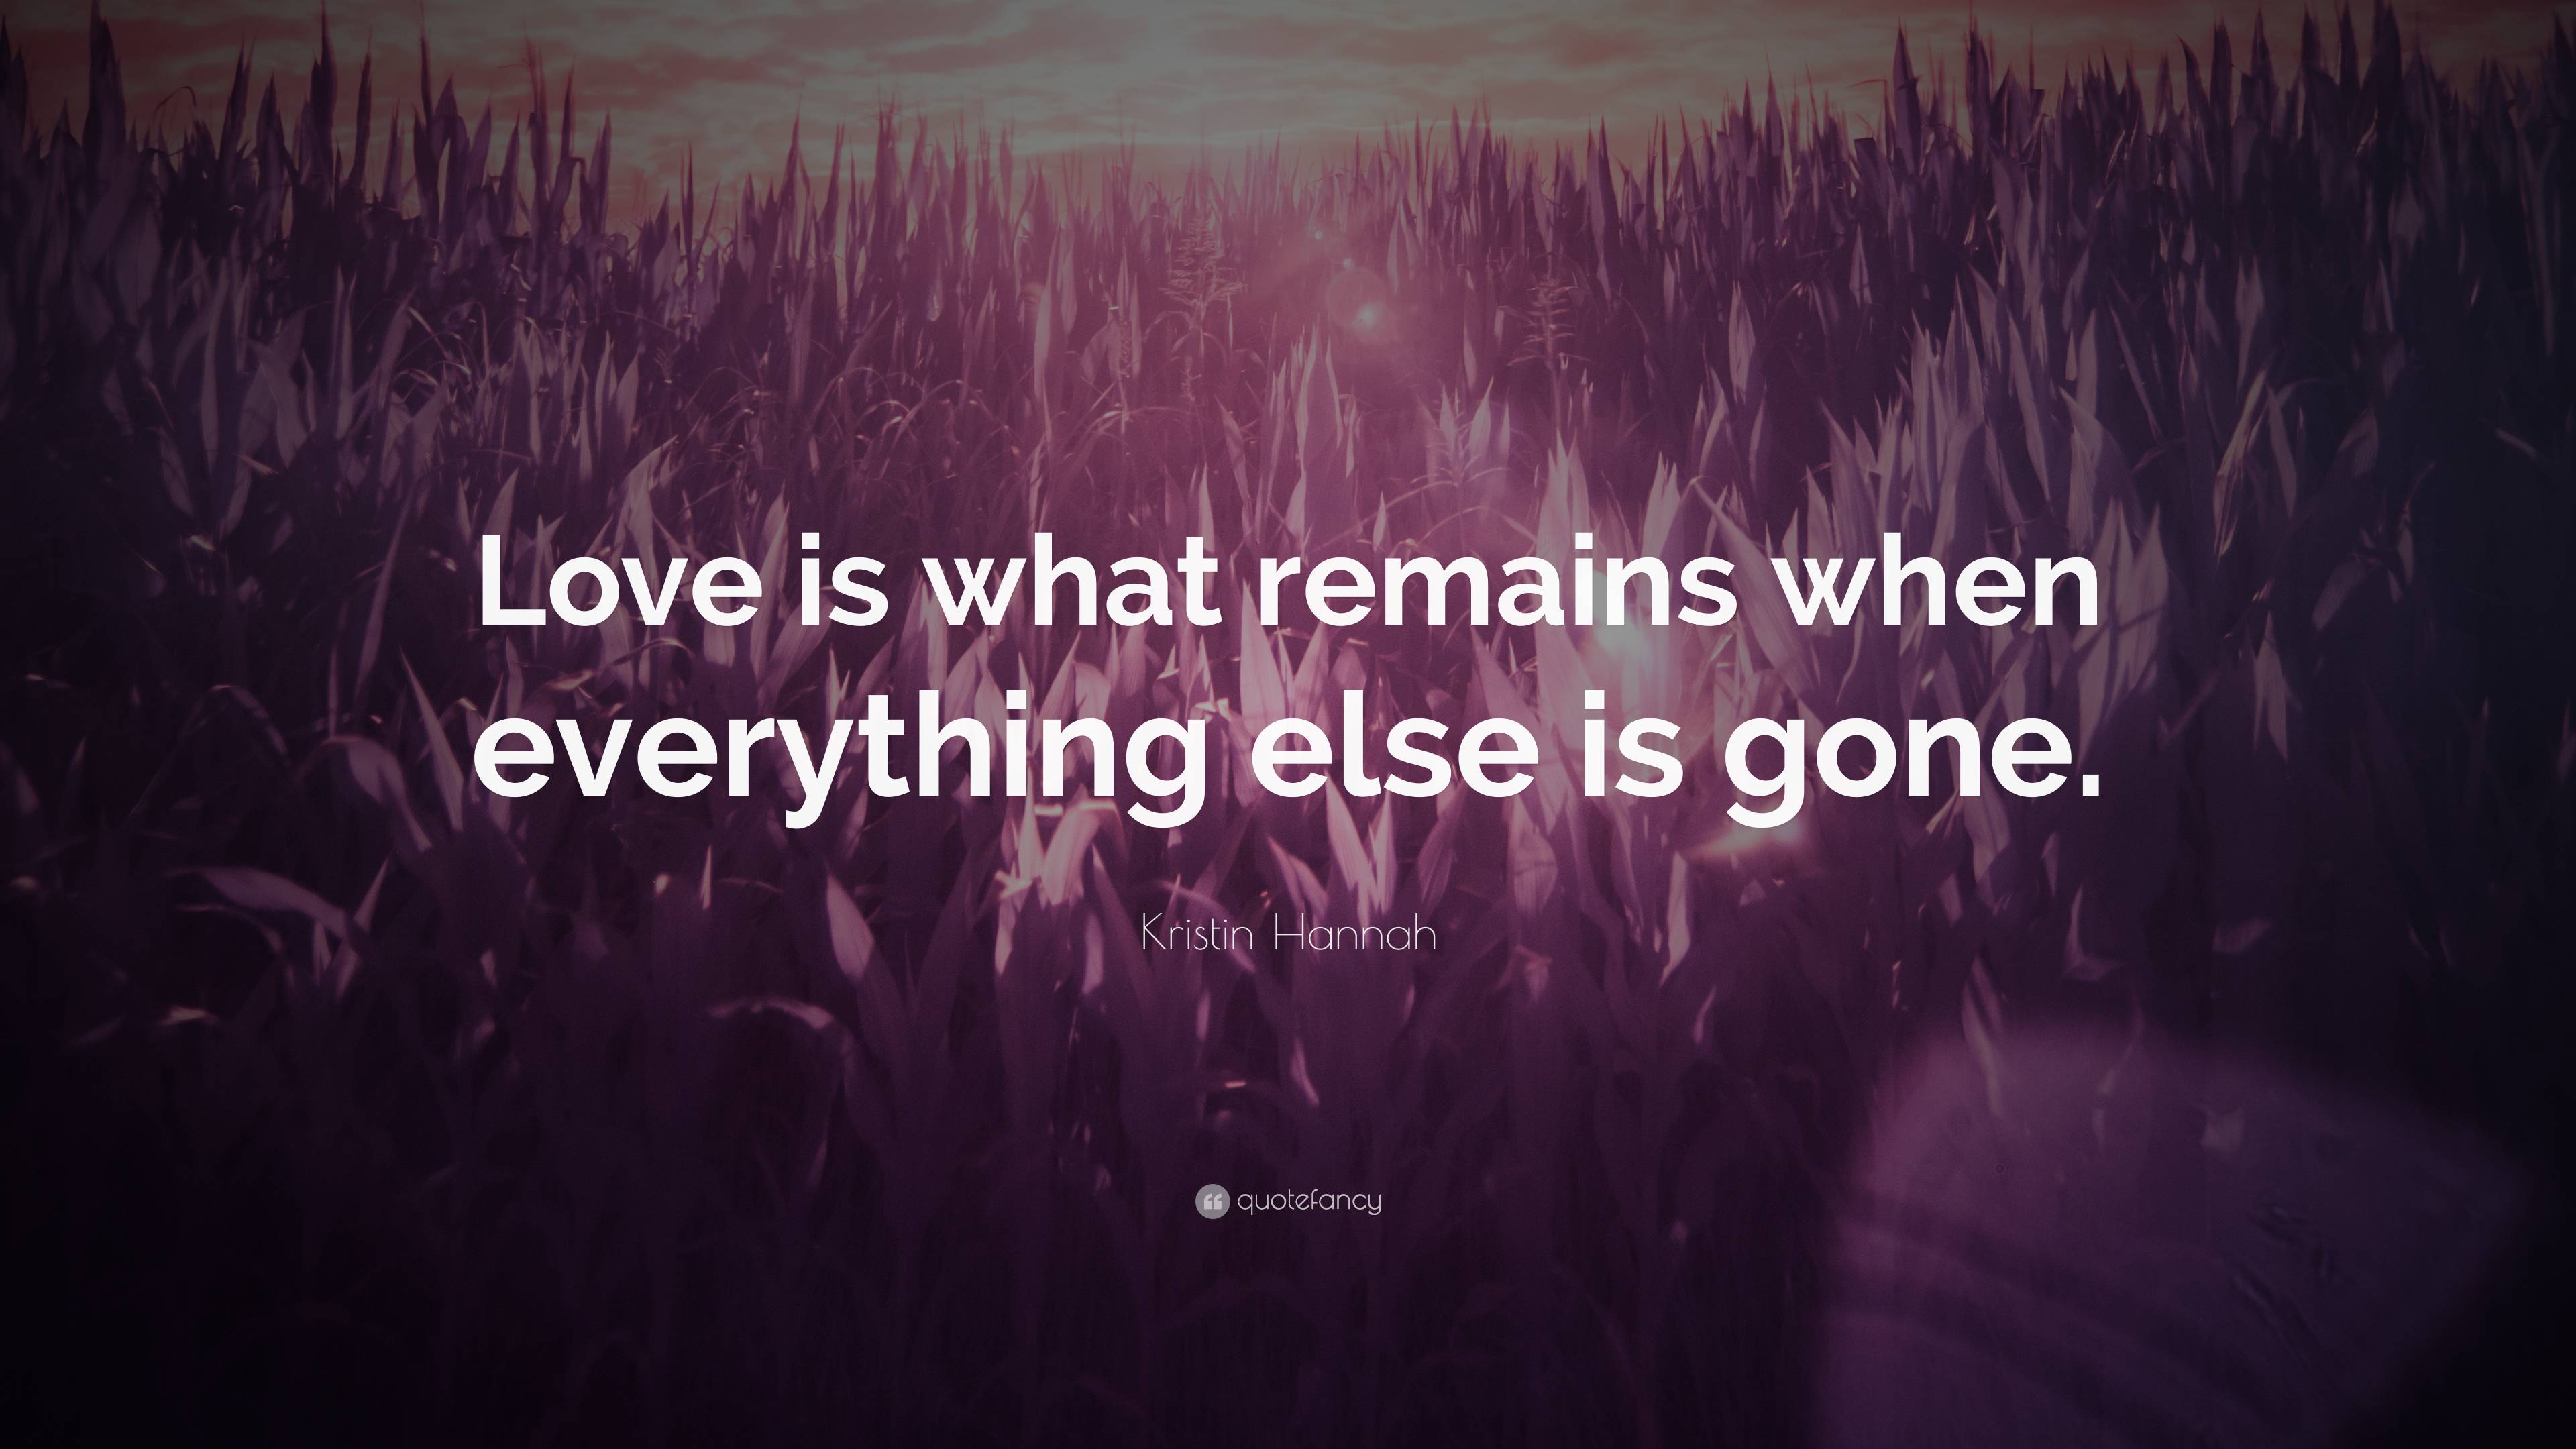 Kristin Hannah Quote: “Love is what remains when everything else is gone.”